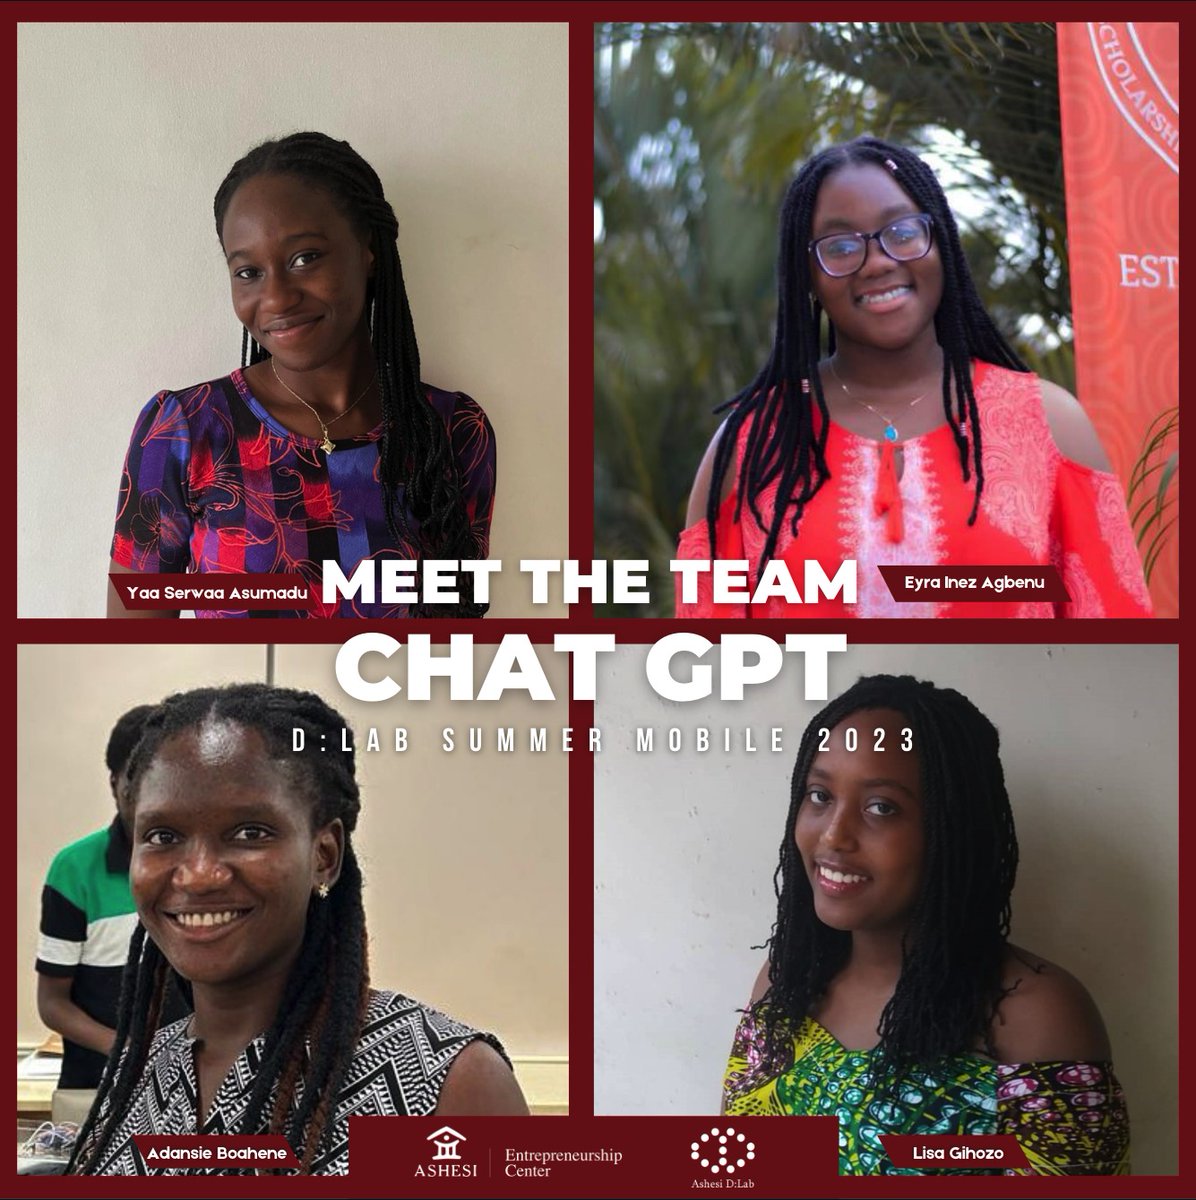 Meet the ChatGPT team👏🏼👏🏼 Their goal is to explore the opportunities and threats of ChatGPT as well as its implications in Ashesi as an academic community. #atasheshidlab #ashesientship #dlab #atashesi #ChatGPT #designthinking #threats #dlabsummermobile